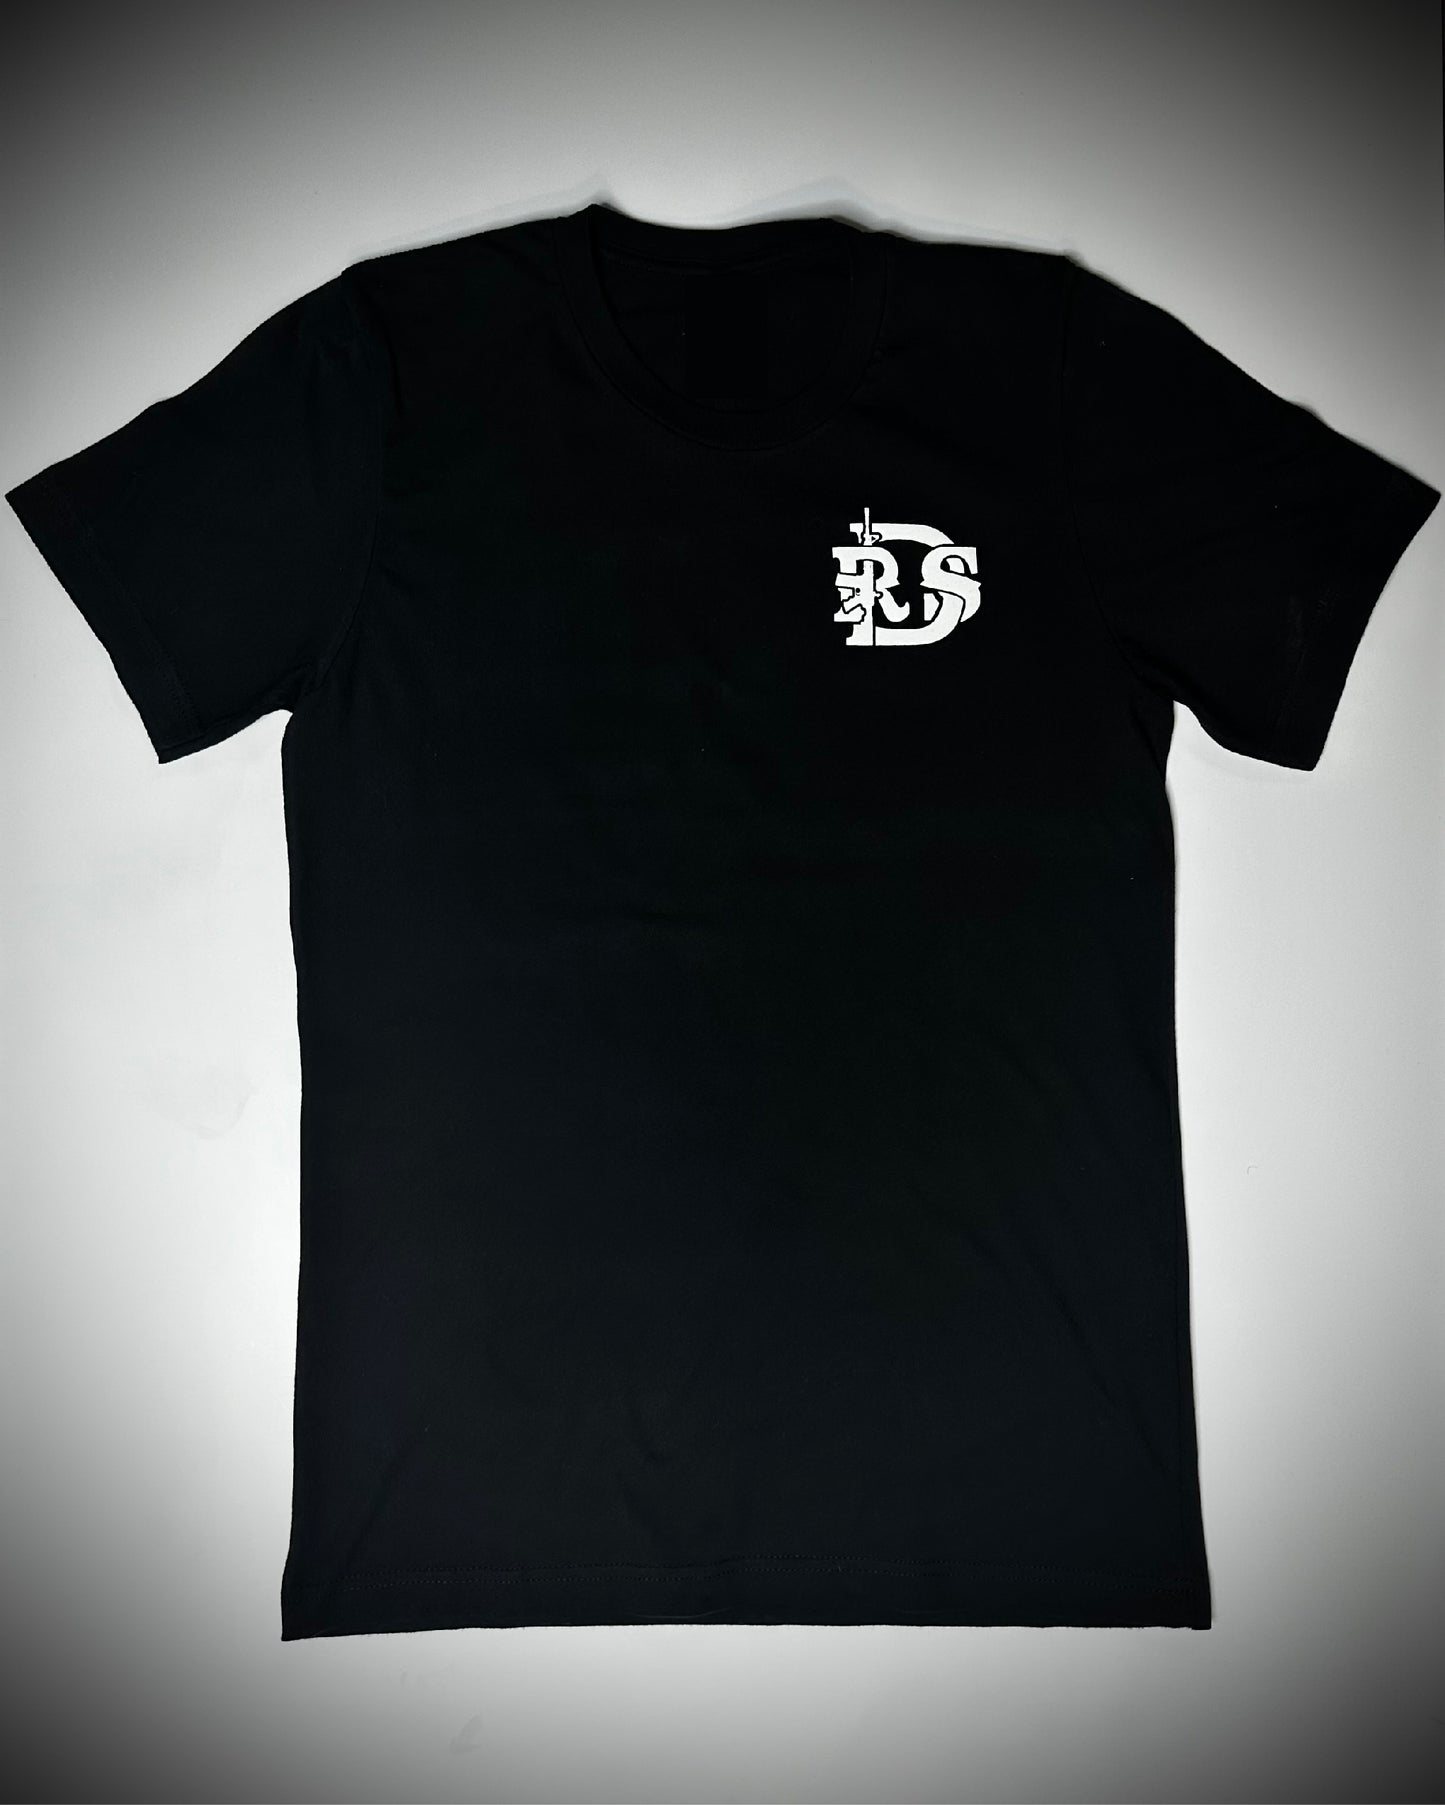 Last of a Dying Breed T-Shirt